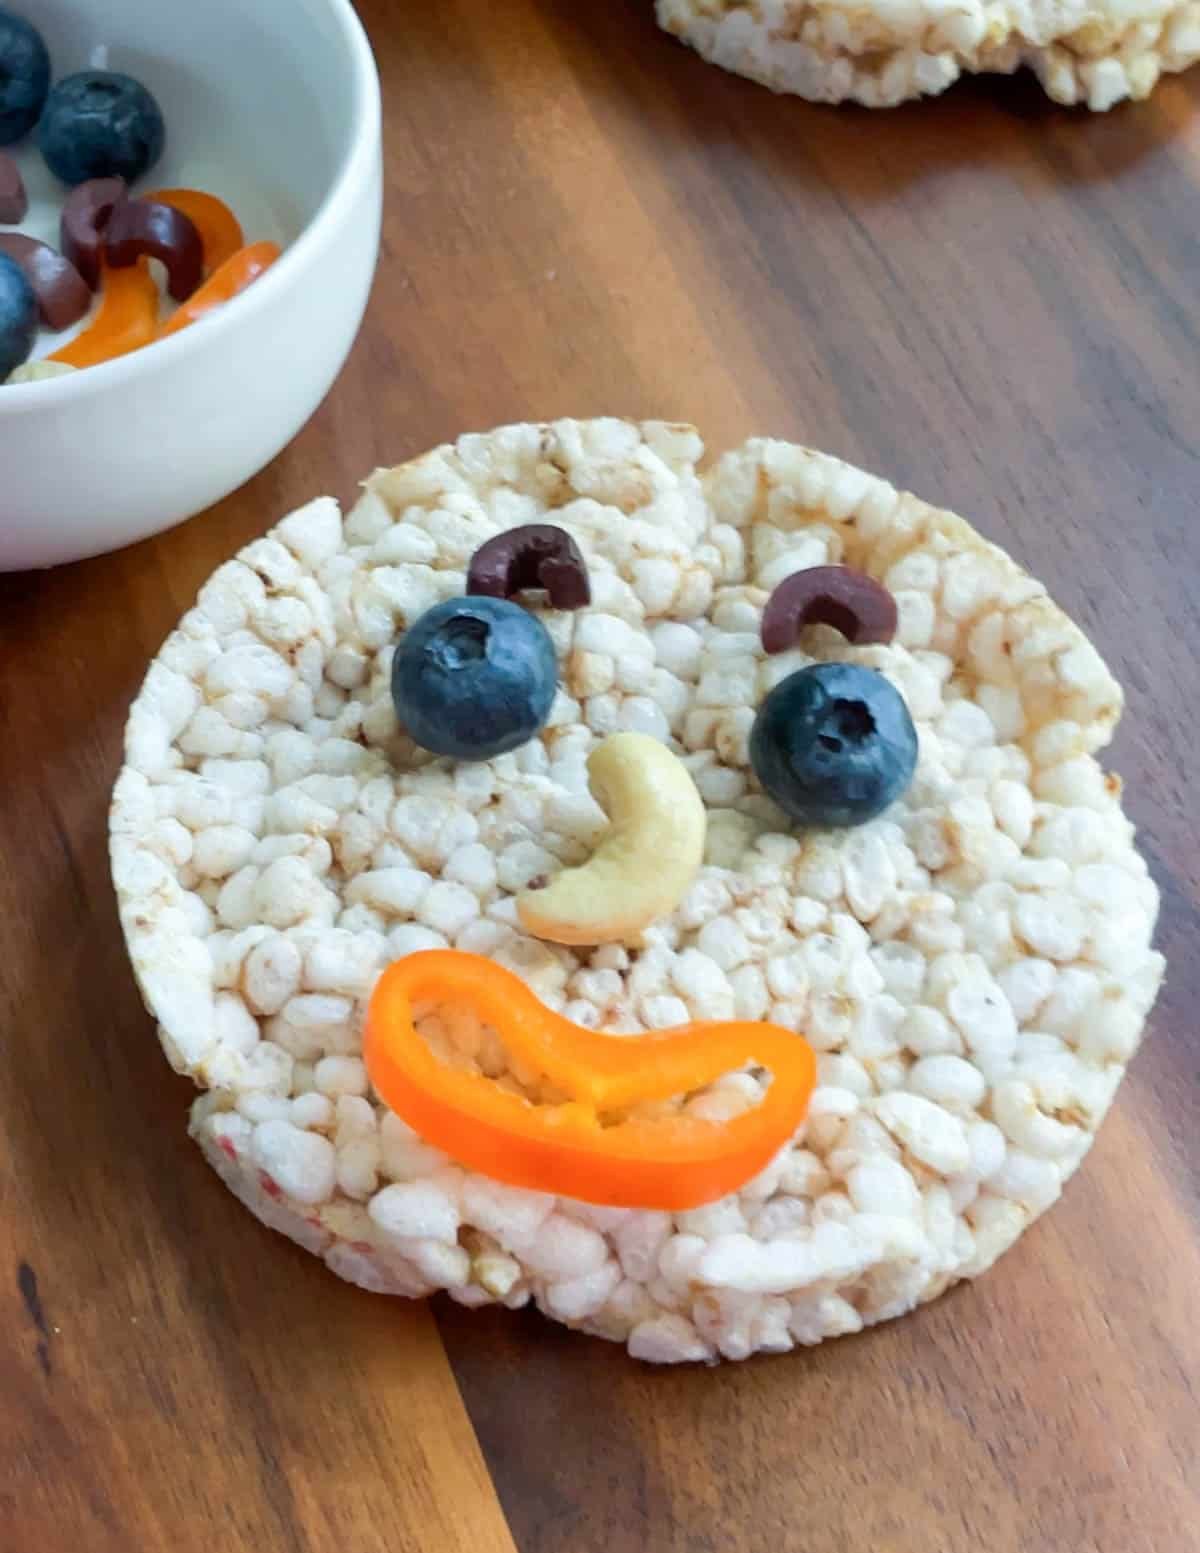 Rice cake made to look like a face with blueberry eyes, cashew nose, pepper mouth, and olive eyebrows.
